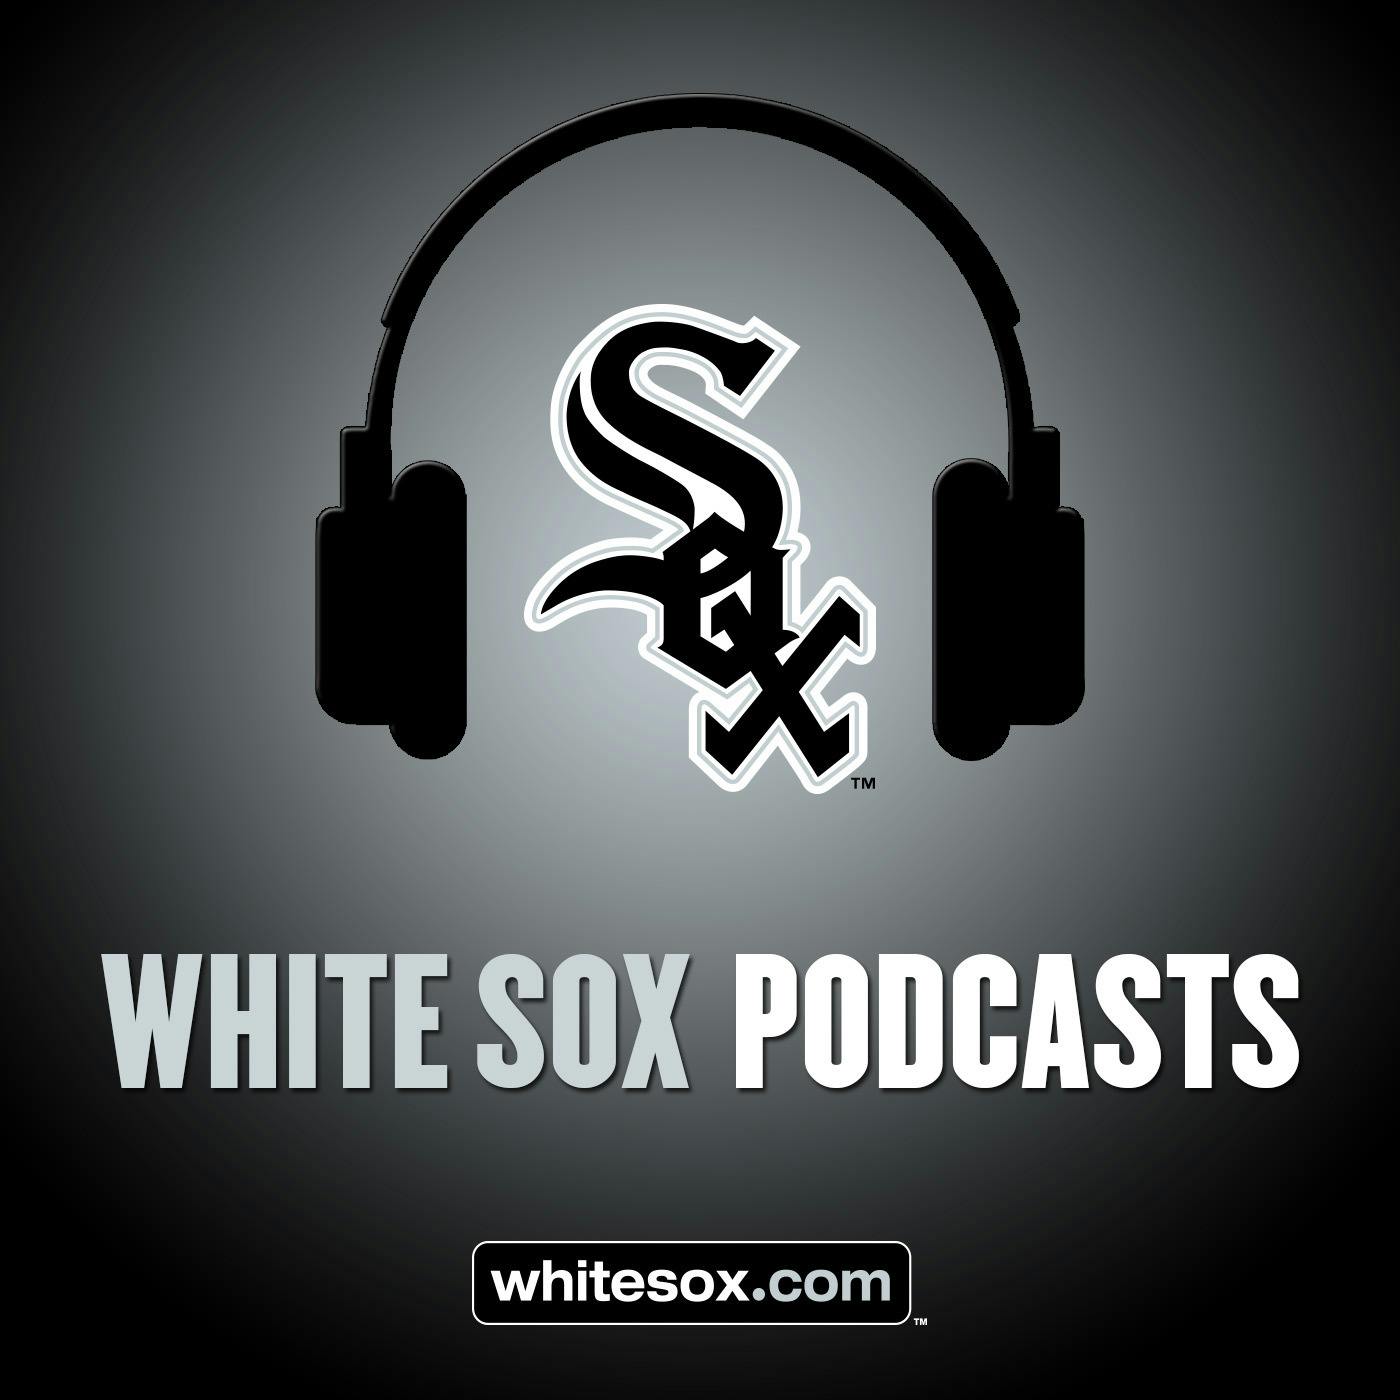 9/23/17: White Sox Weekly